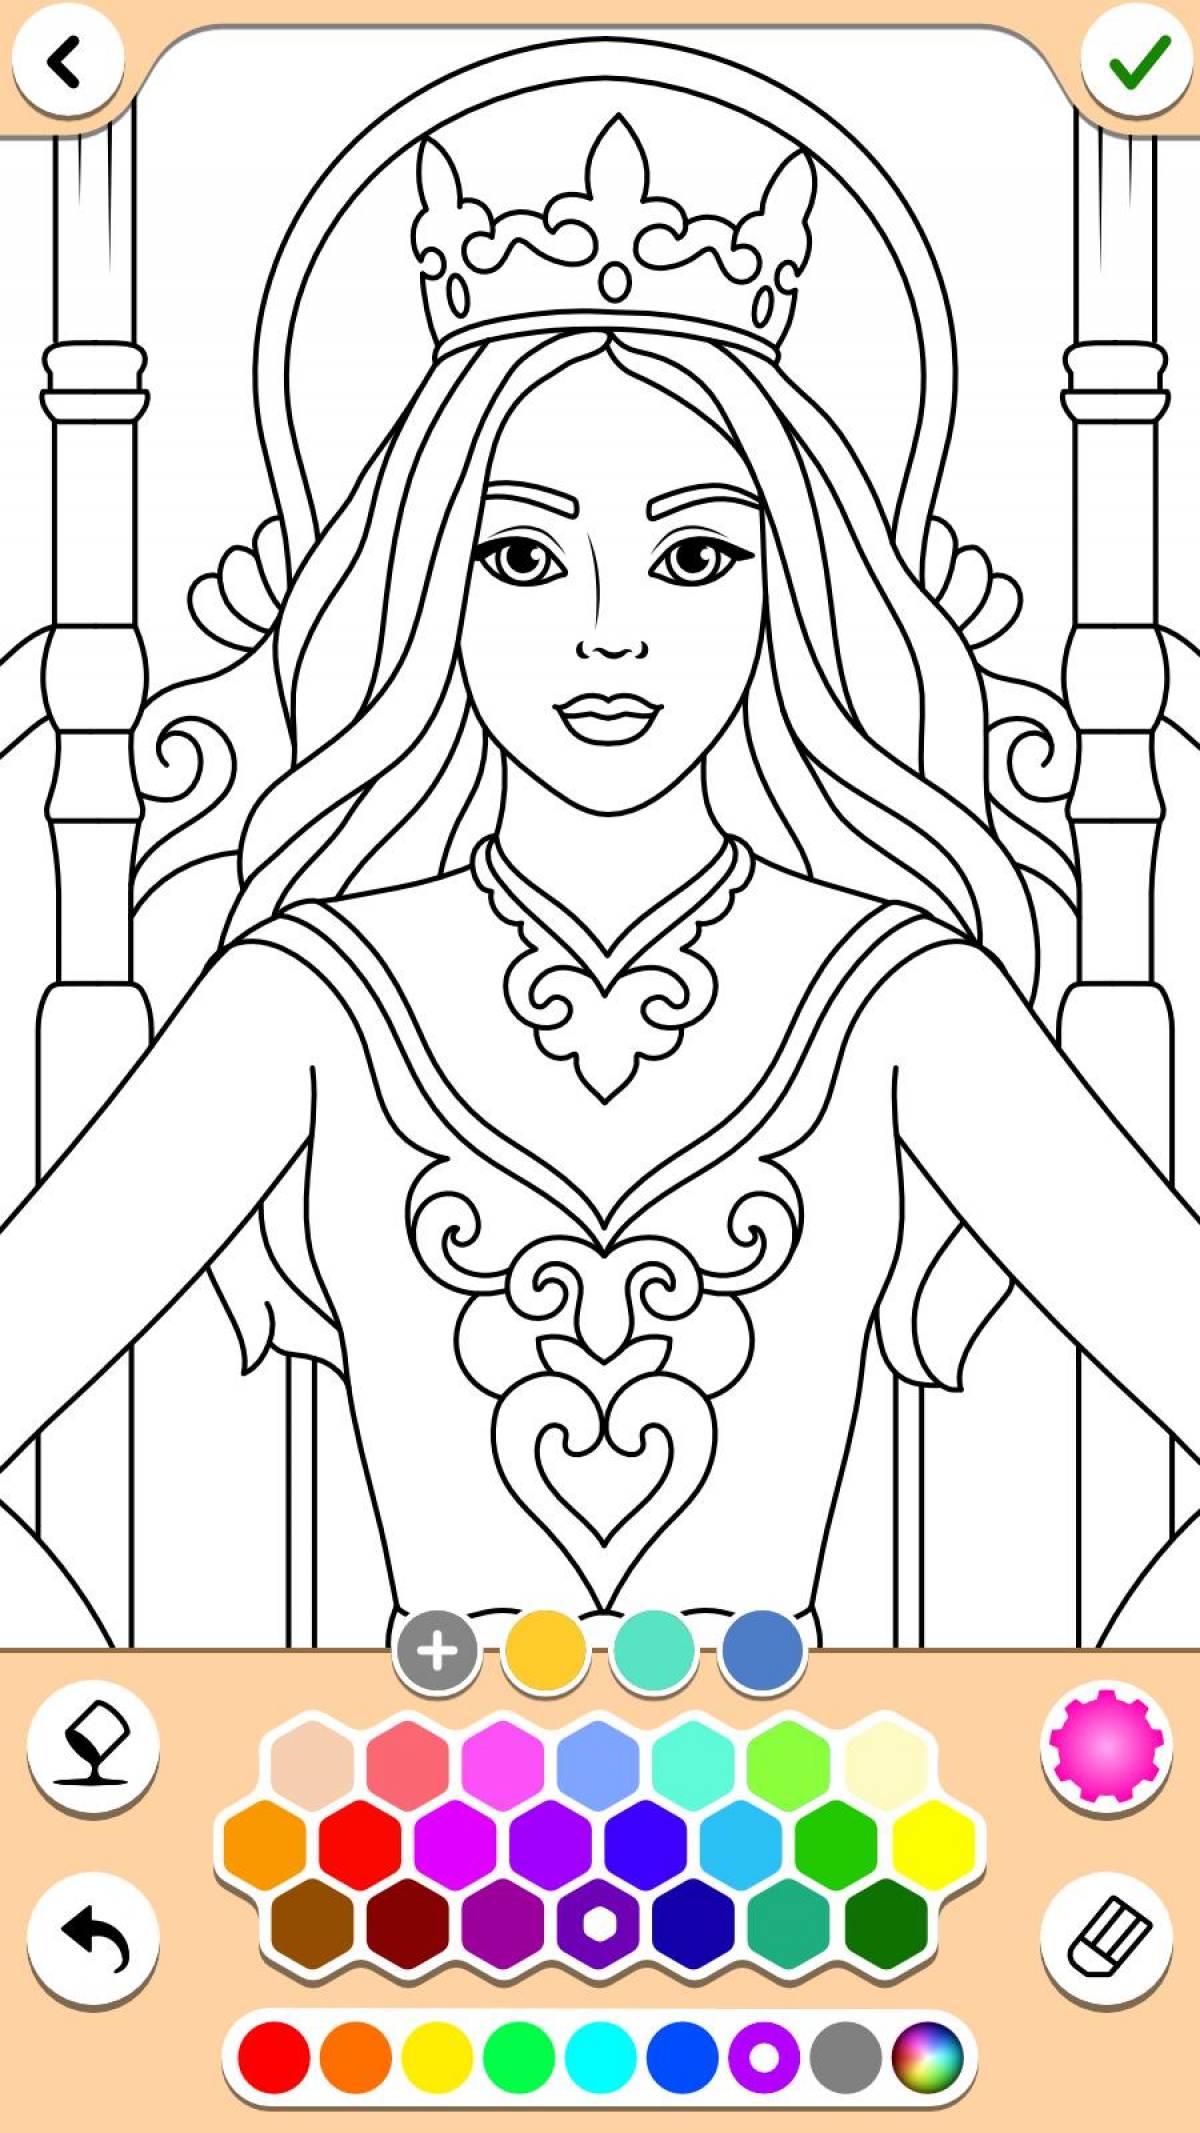 Coloring princess games for girls